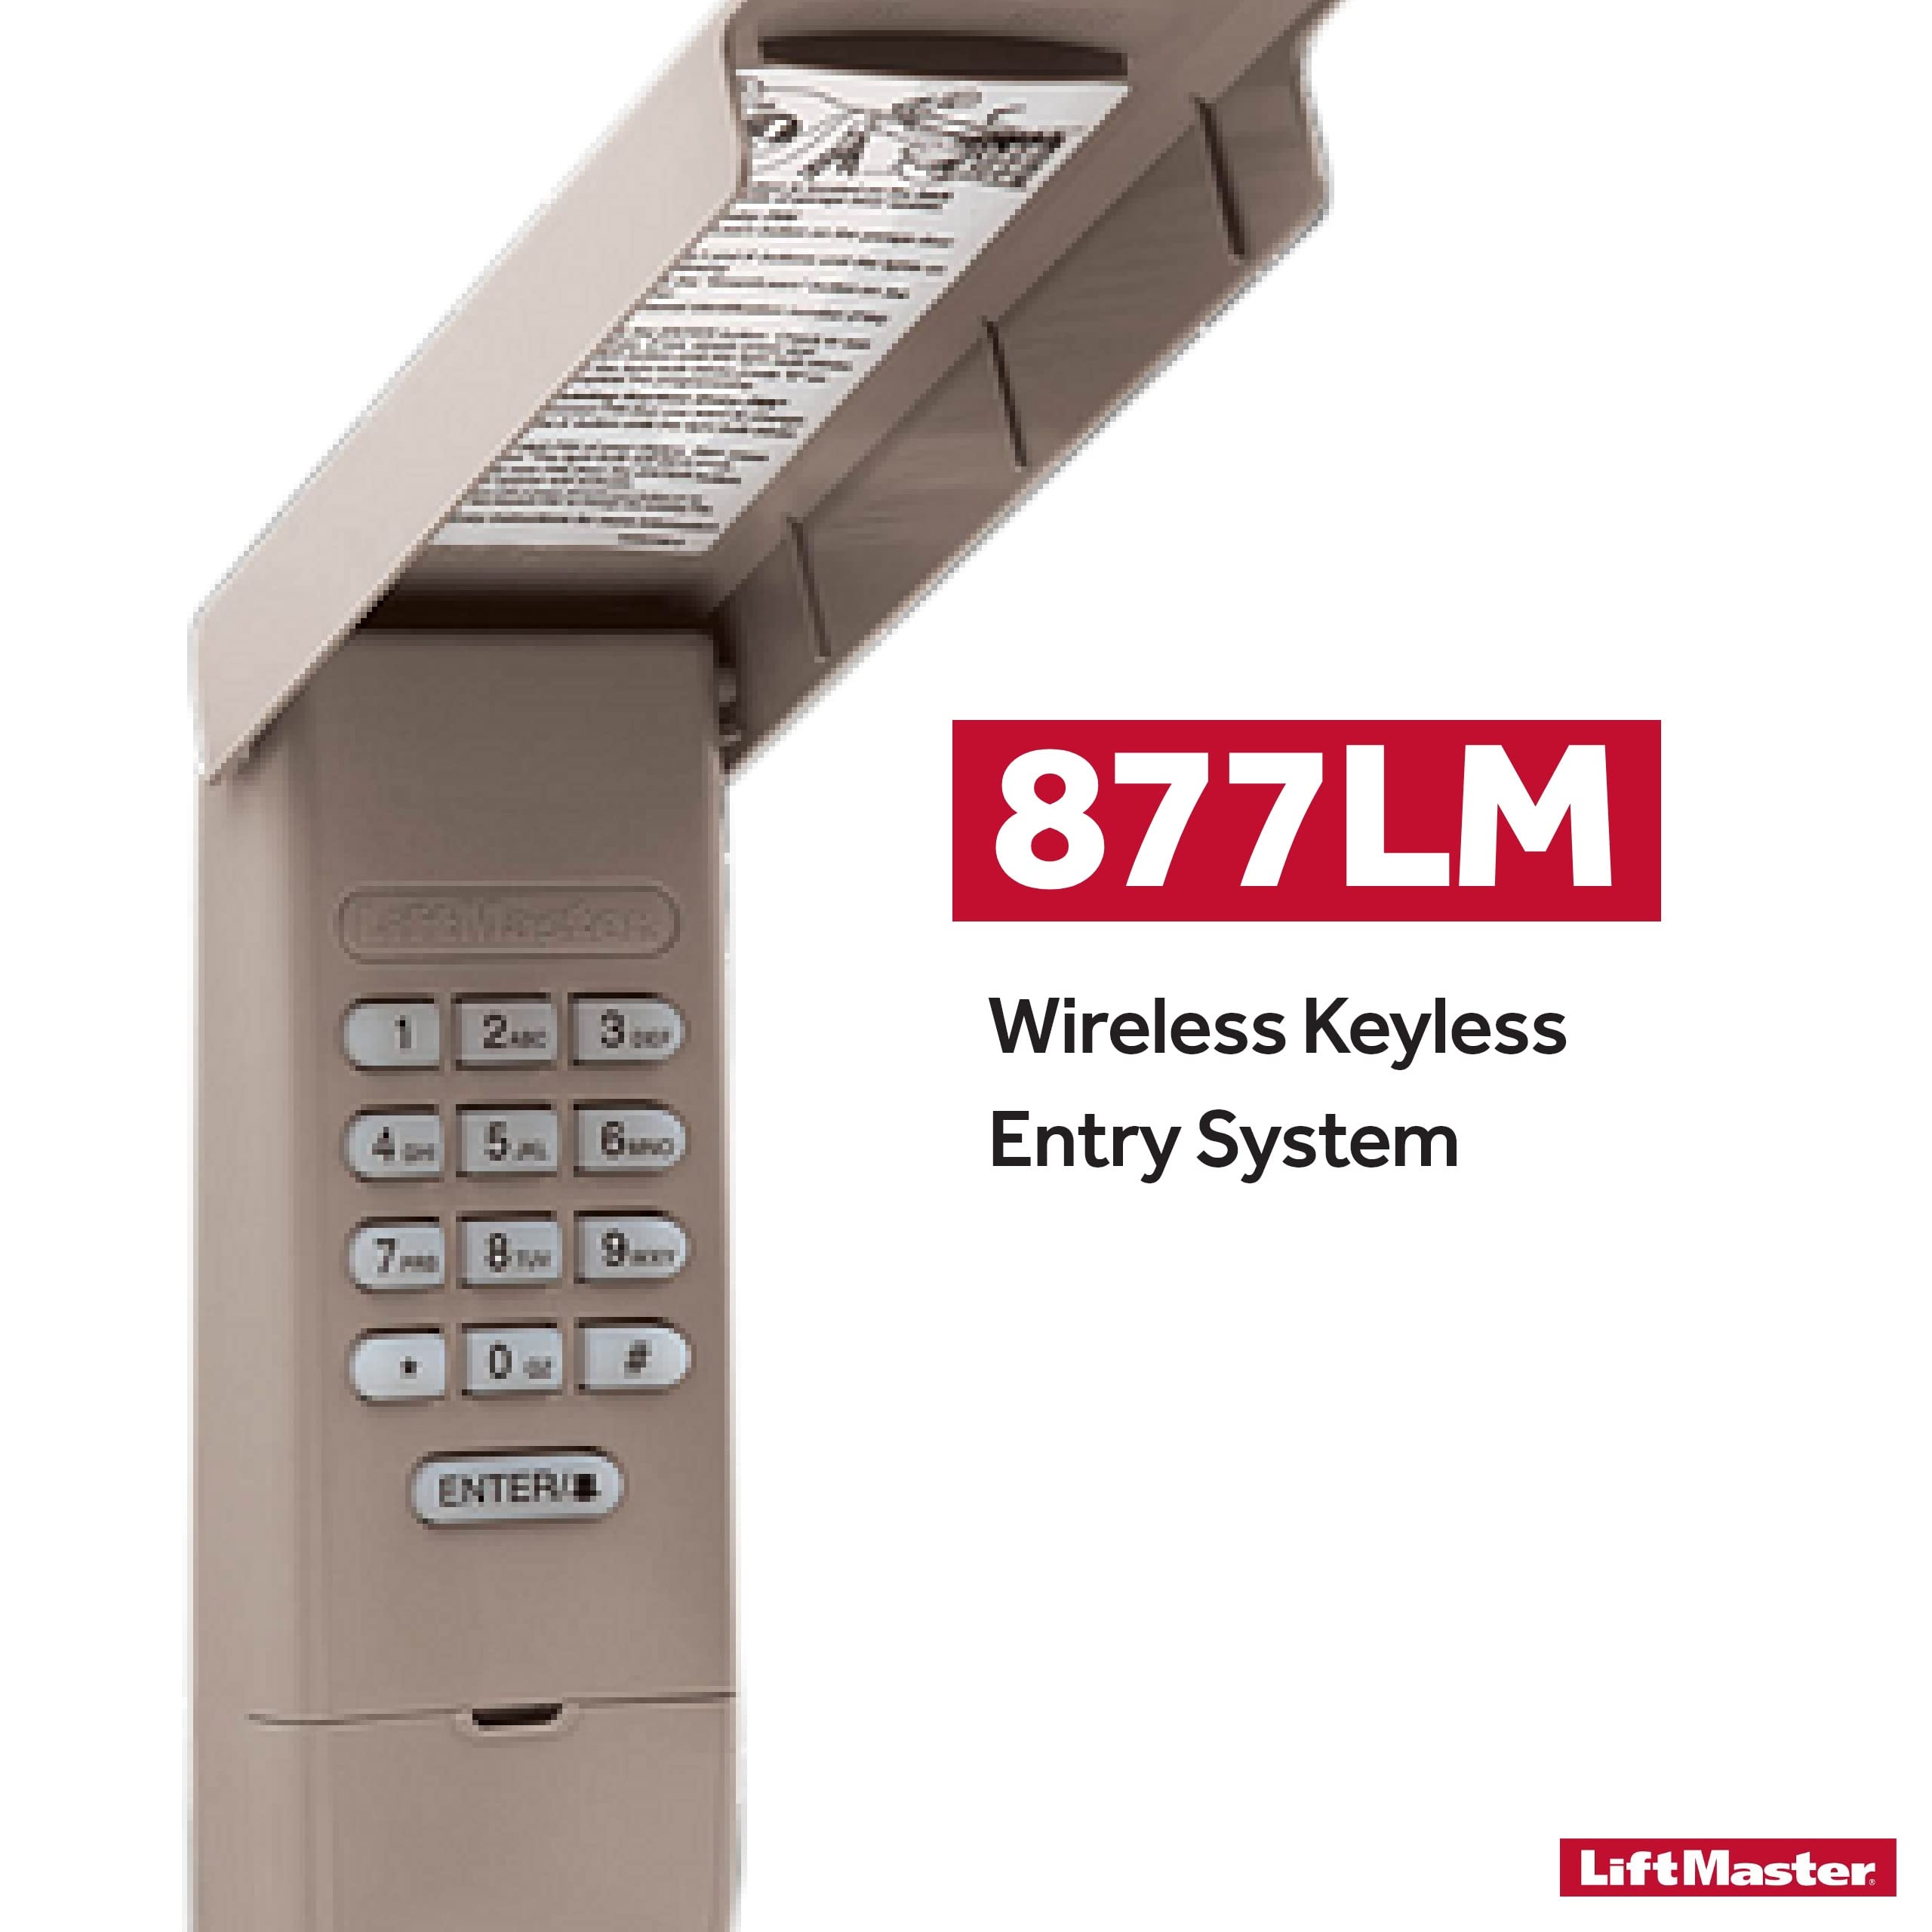 LiftMaster 877LM Wireless and Keyless Entry Keypad for Garage Door Openers and Gate Opener  - Very Good